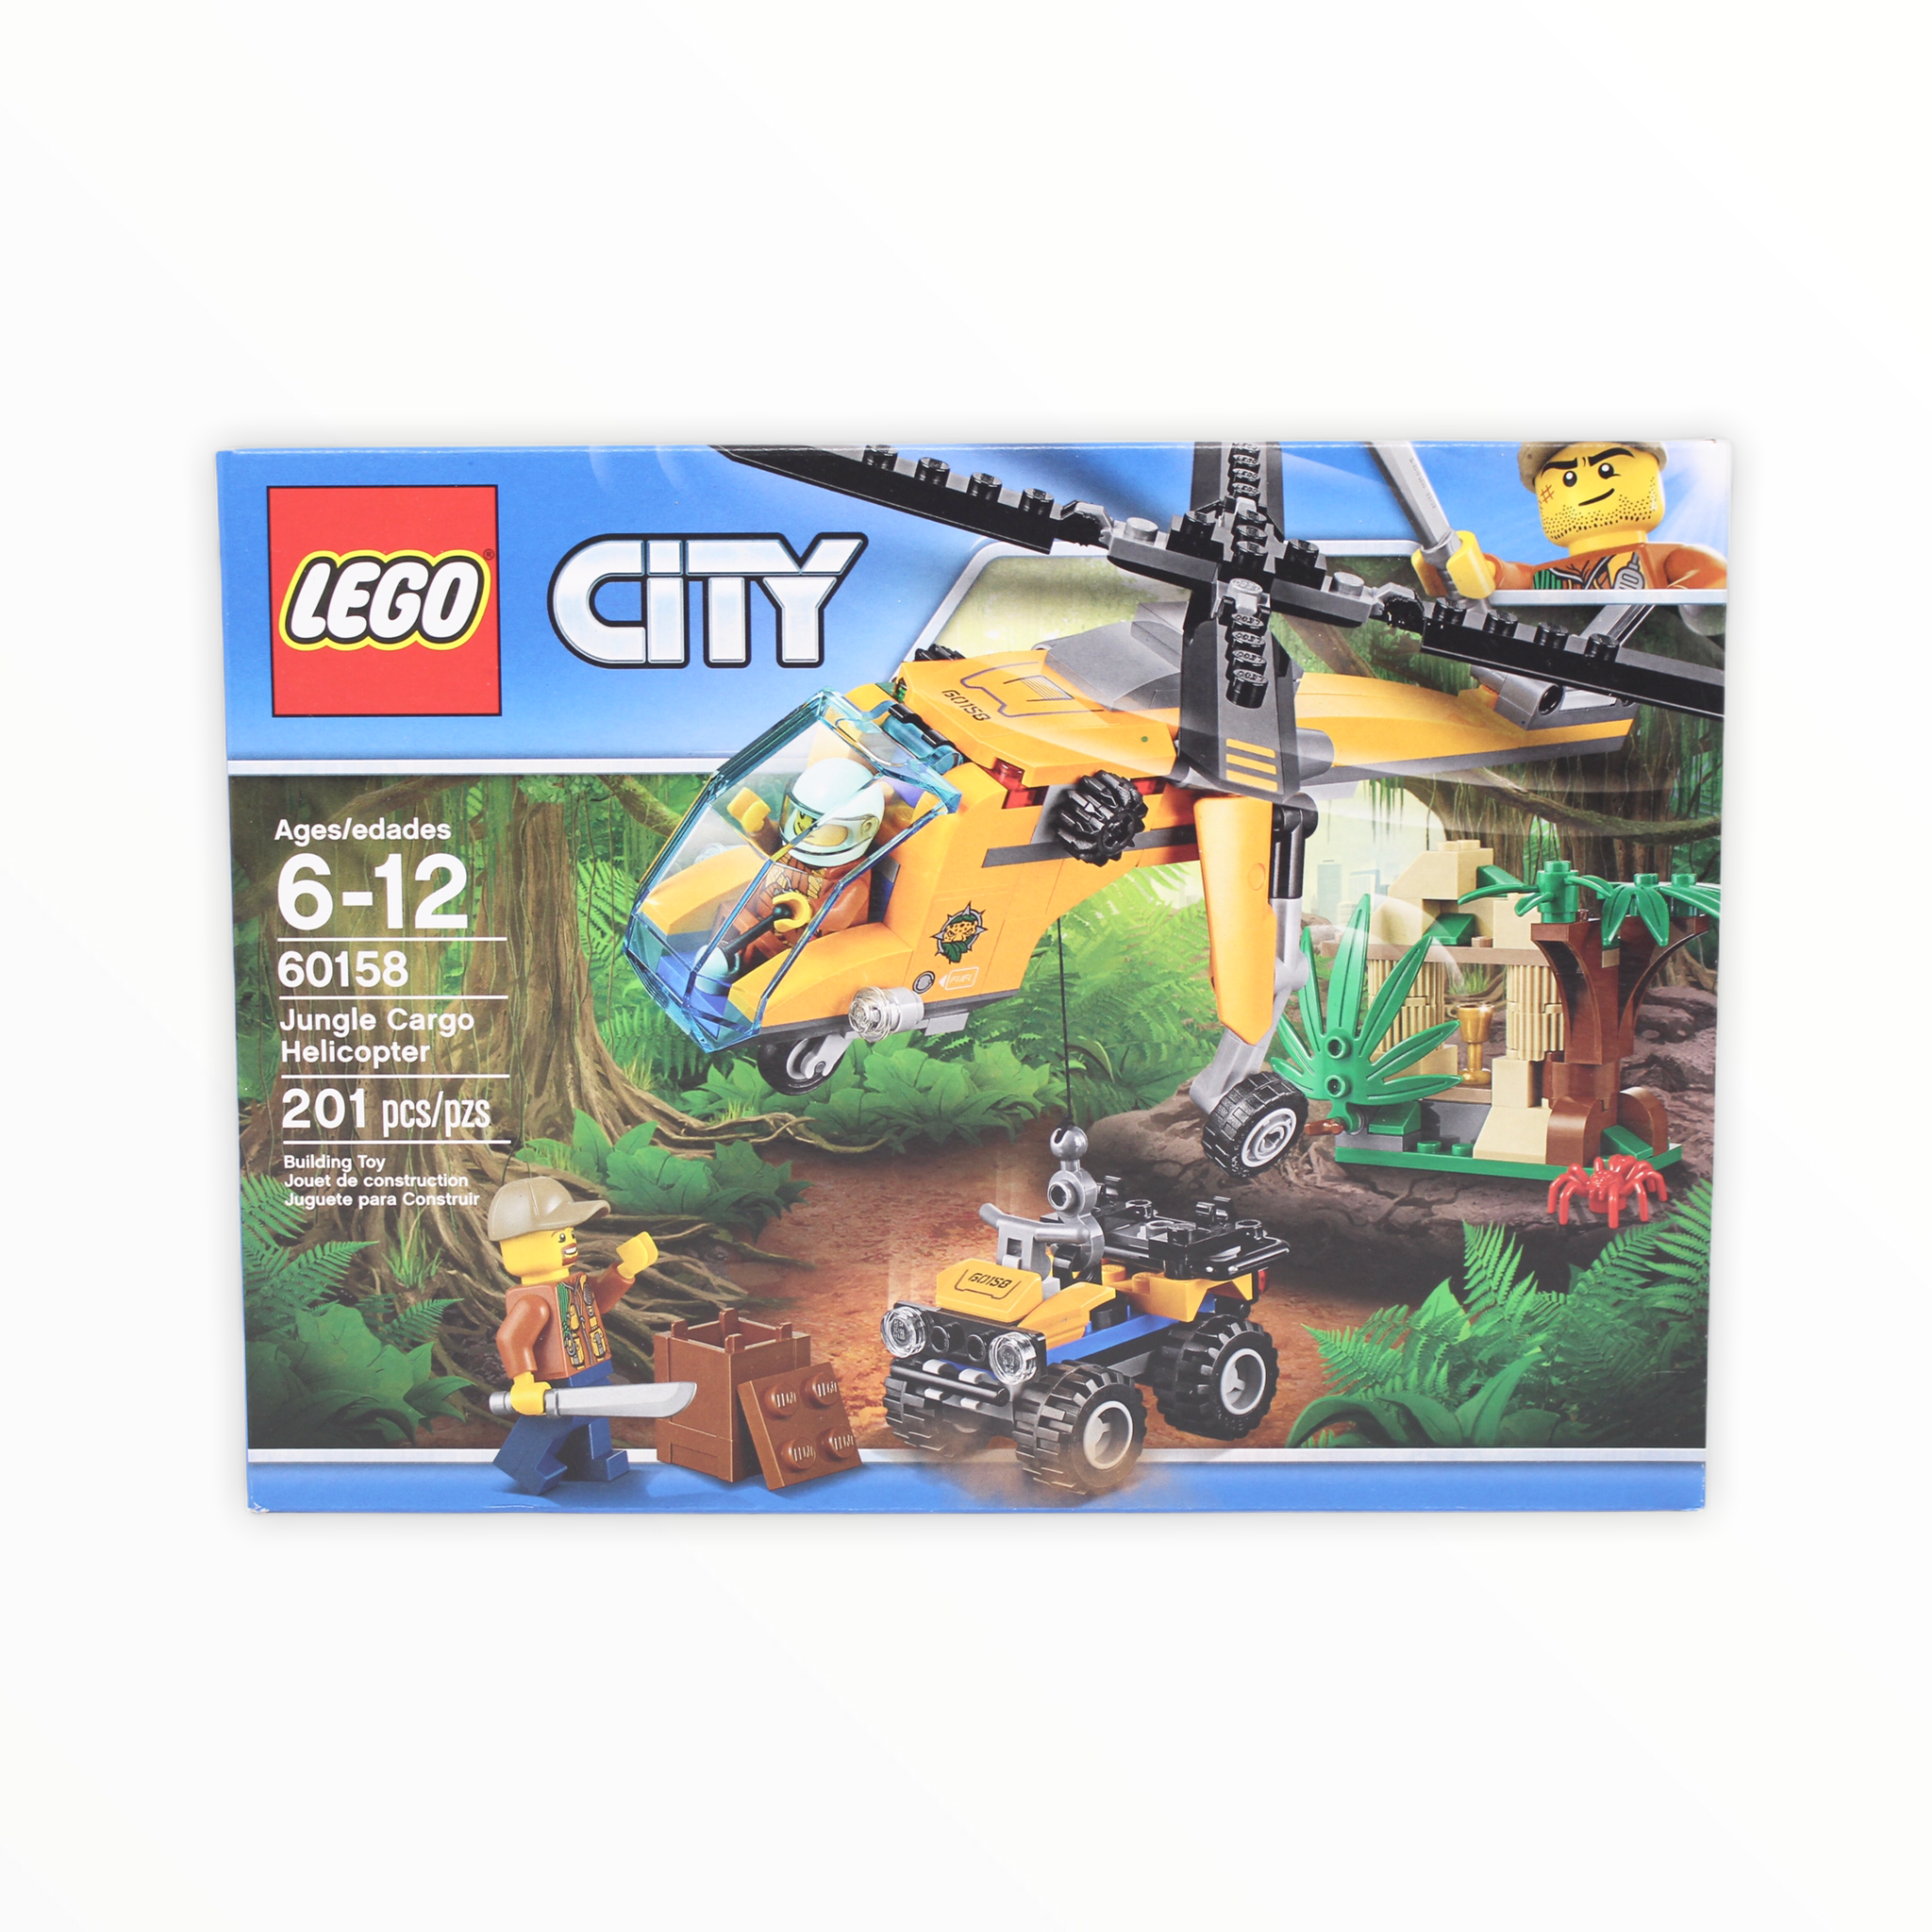 Retired Set 60158 City Jungle Cargo Helicopter